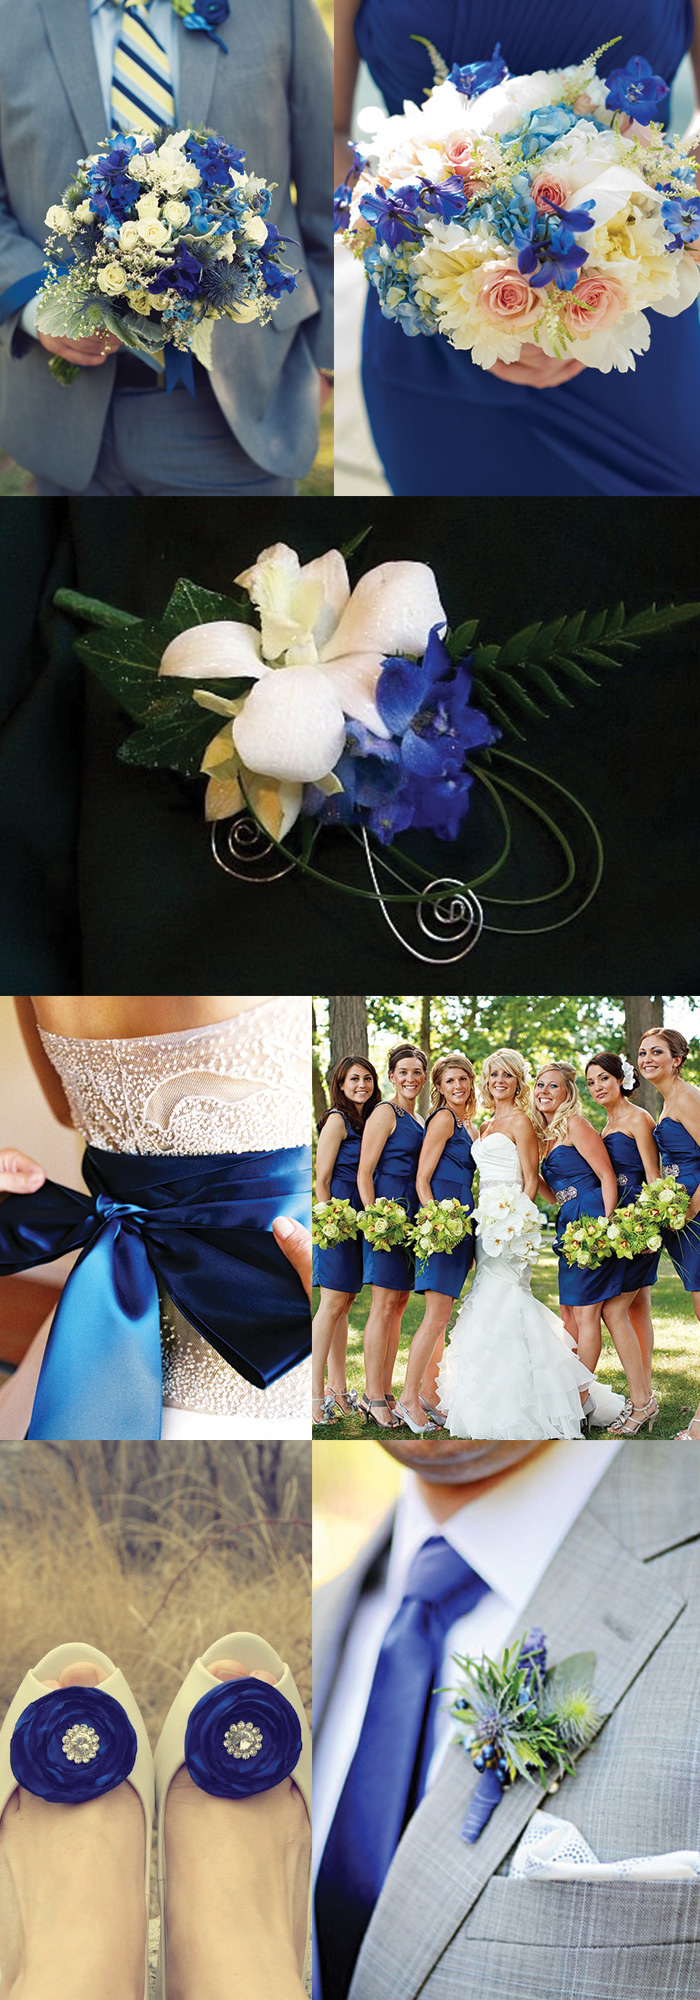 Get Inspired With These Ideas for A Horizon Blue Wedding